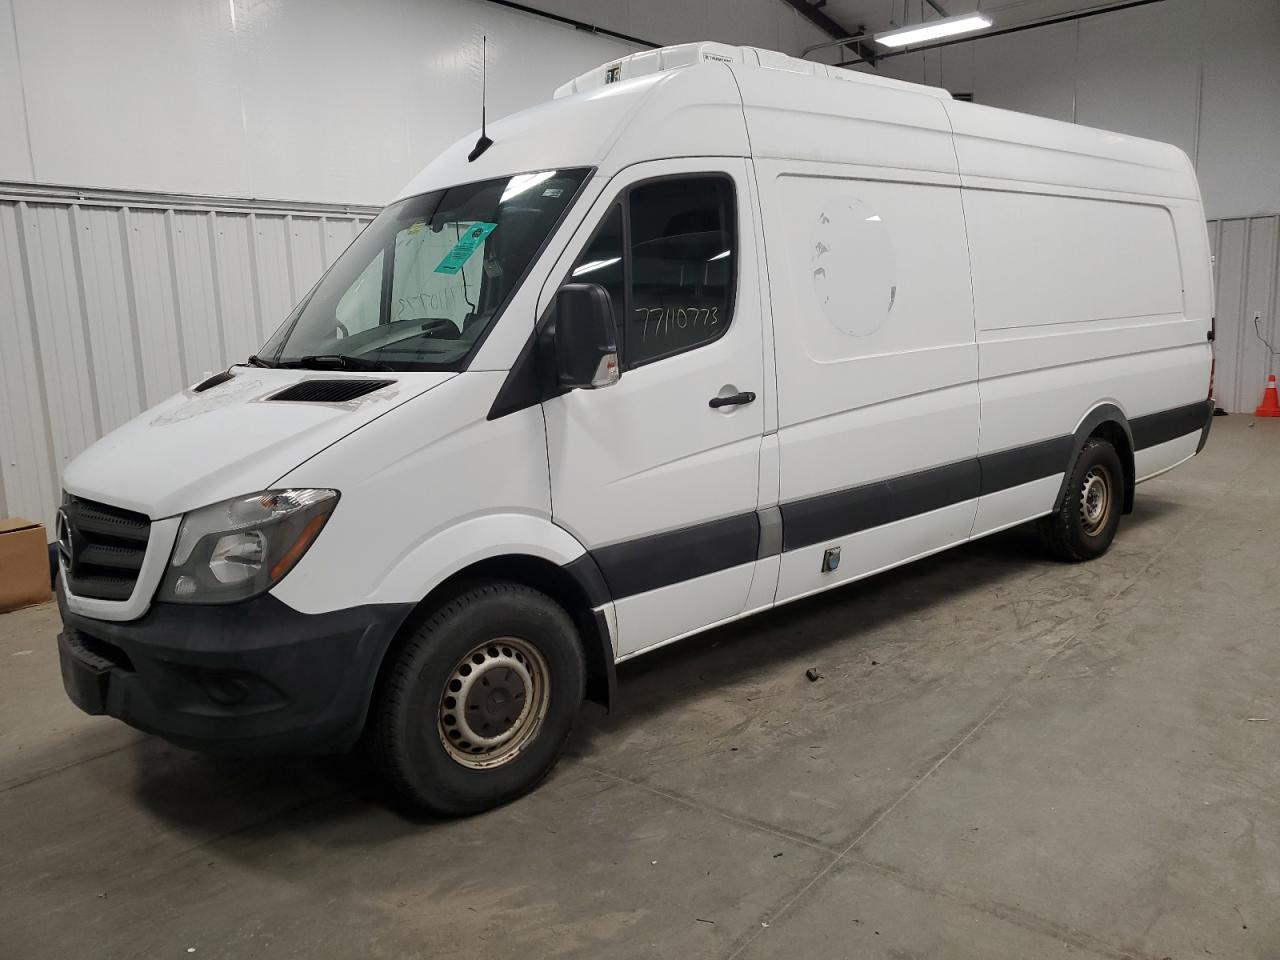 vin: WD3PE8CD7JP605004 WD3PE8CD7JP605004 2018 mercedes-benz sprinter 3000 for Sale in 04062, Me - Windham, Windham, Maine, USA